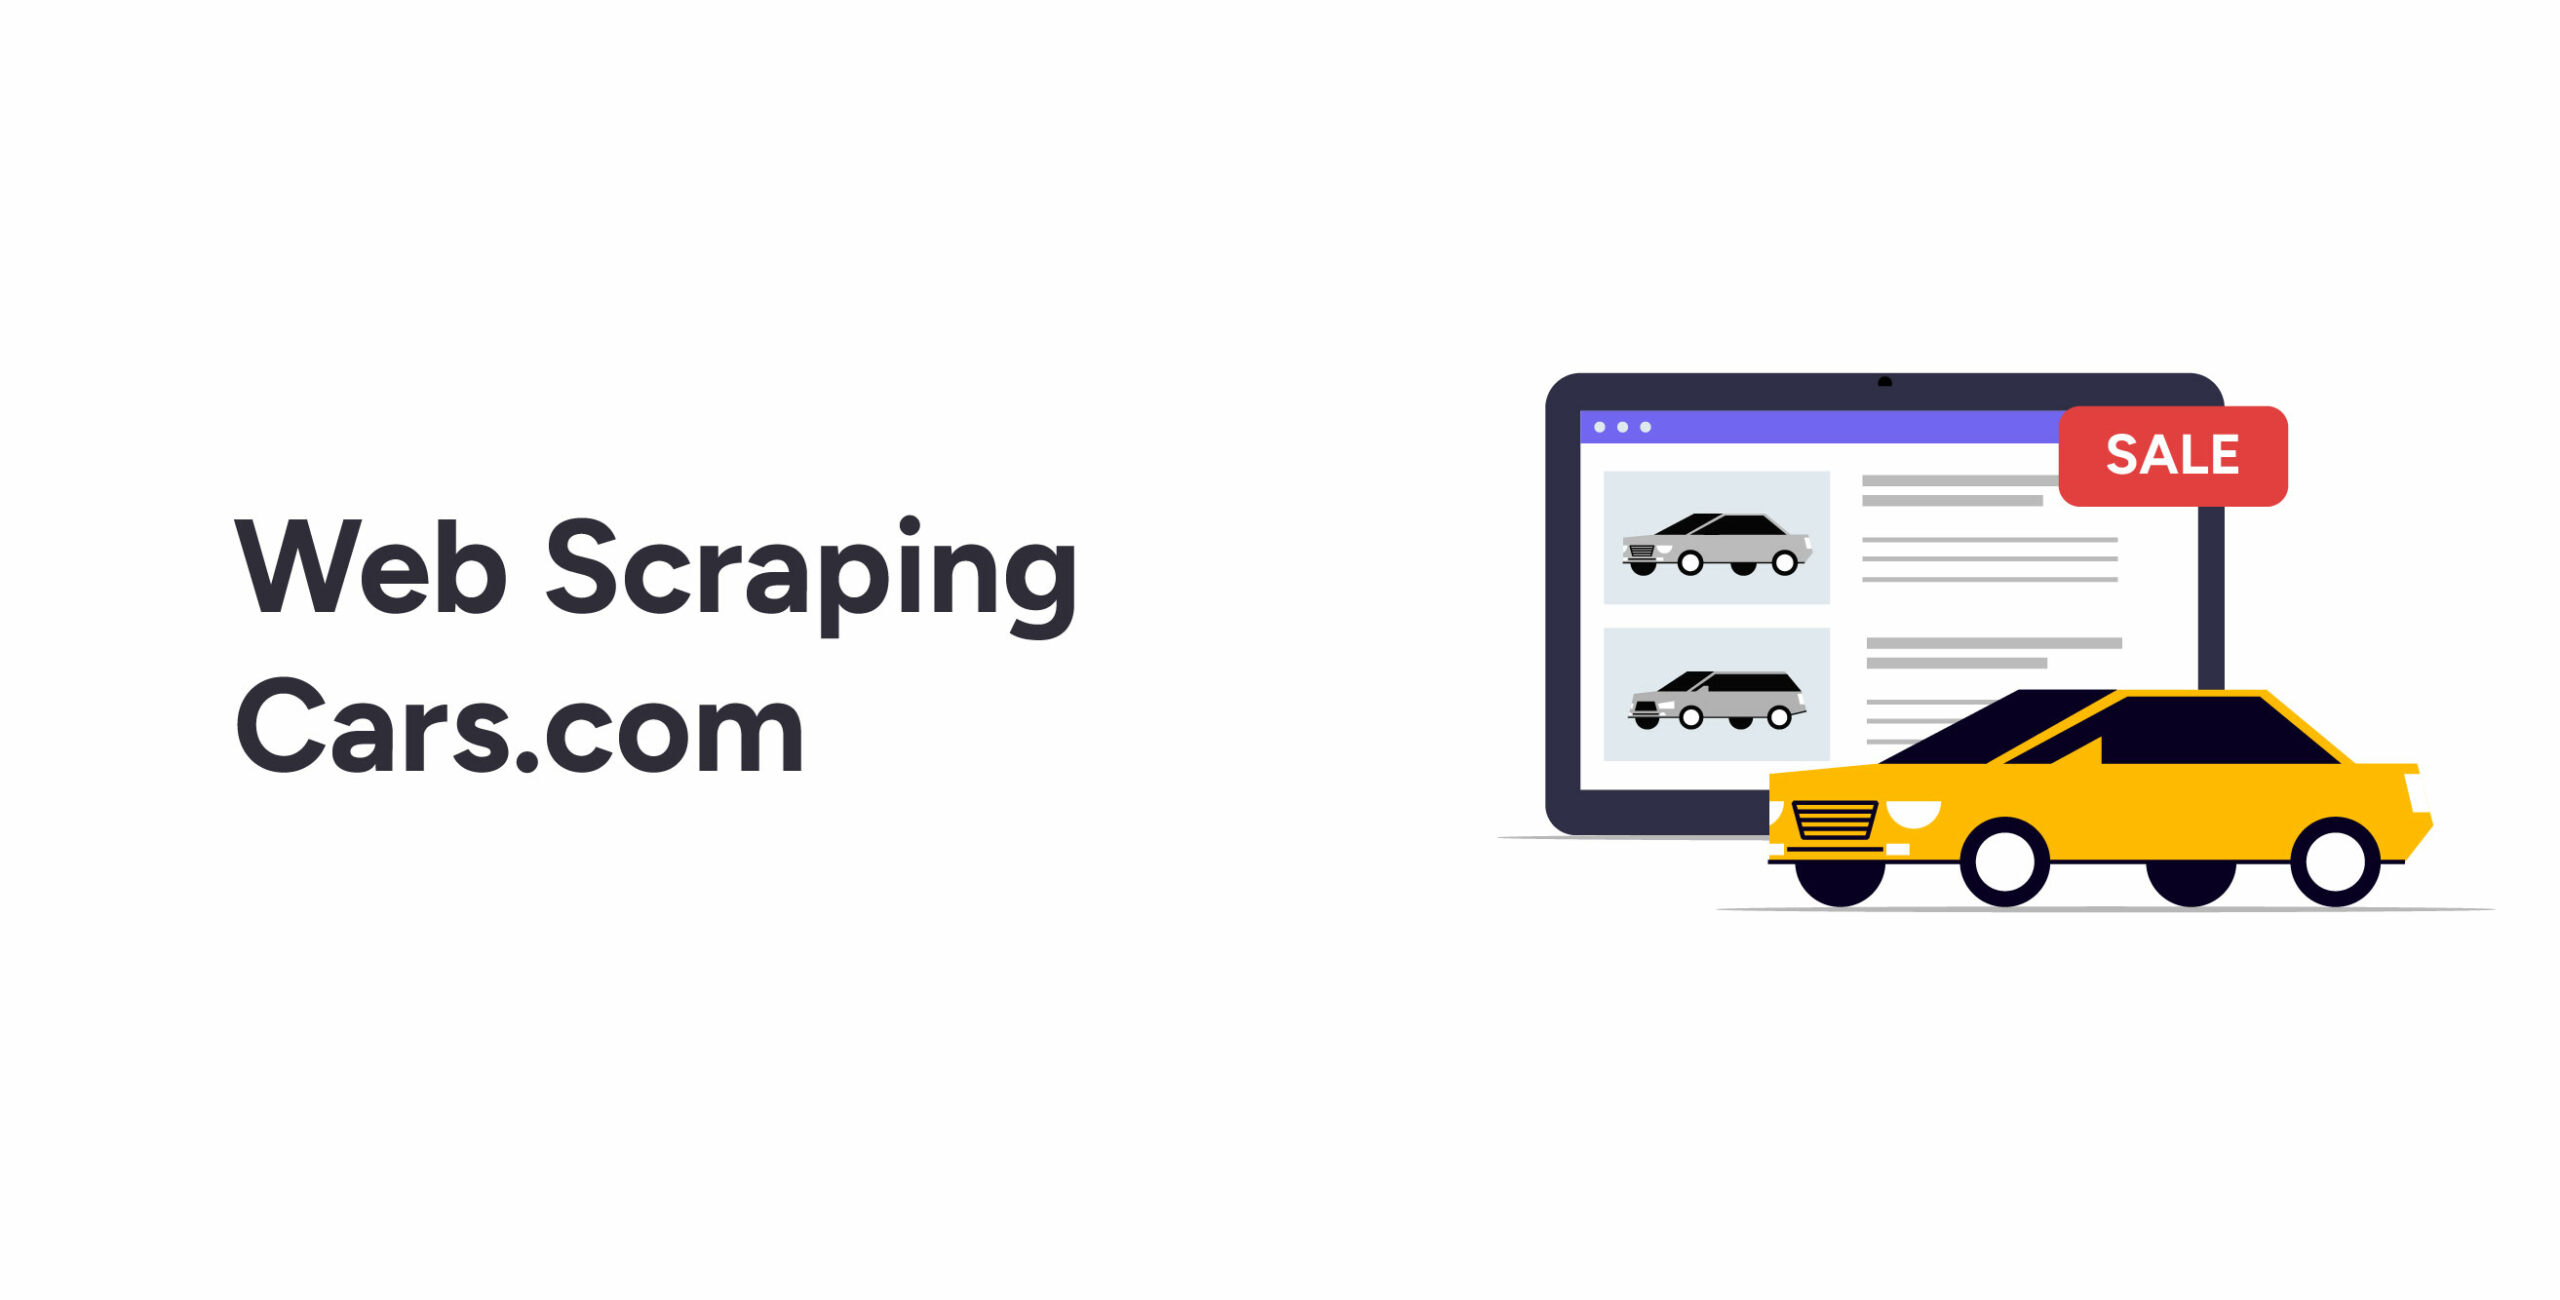 Learn about web scraping cars.com using Python requests and BeautifulSoup.